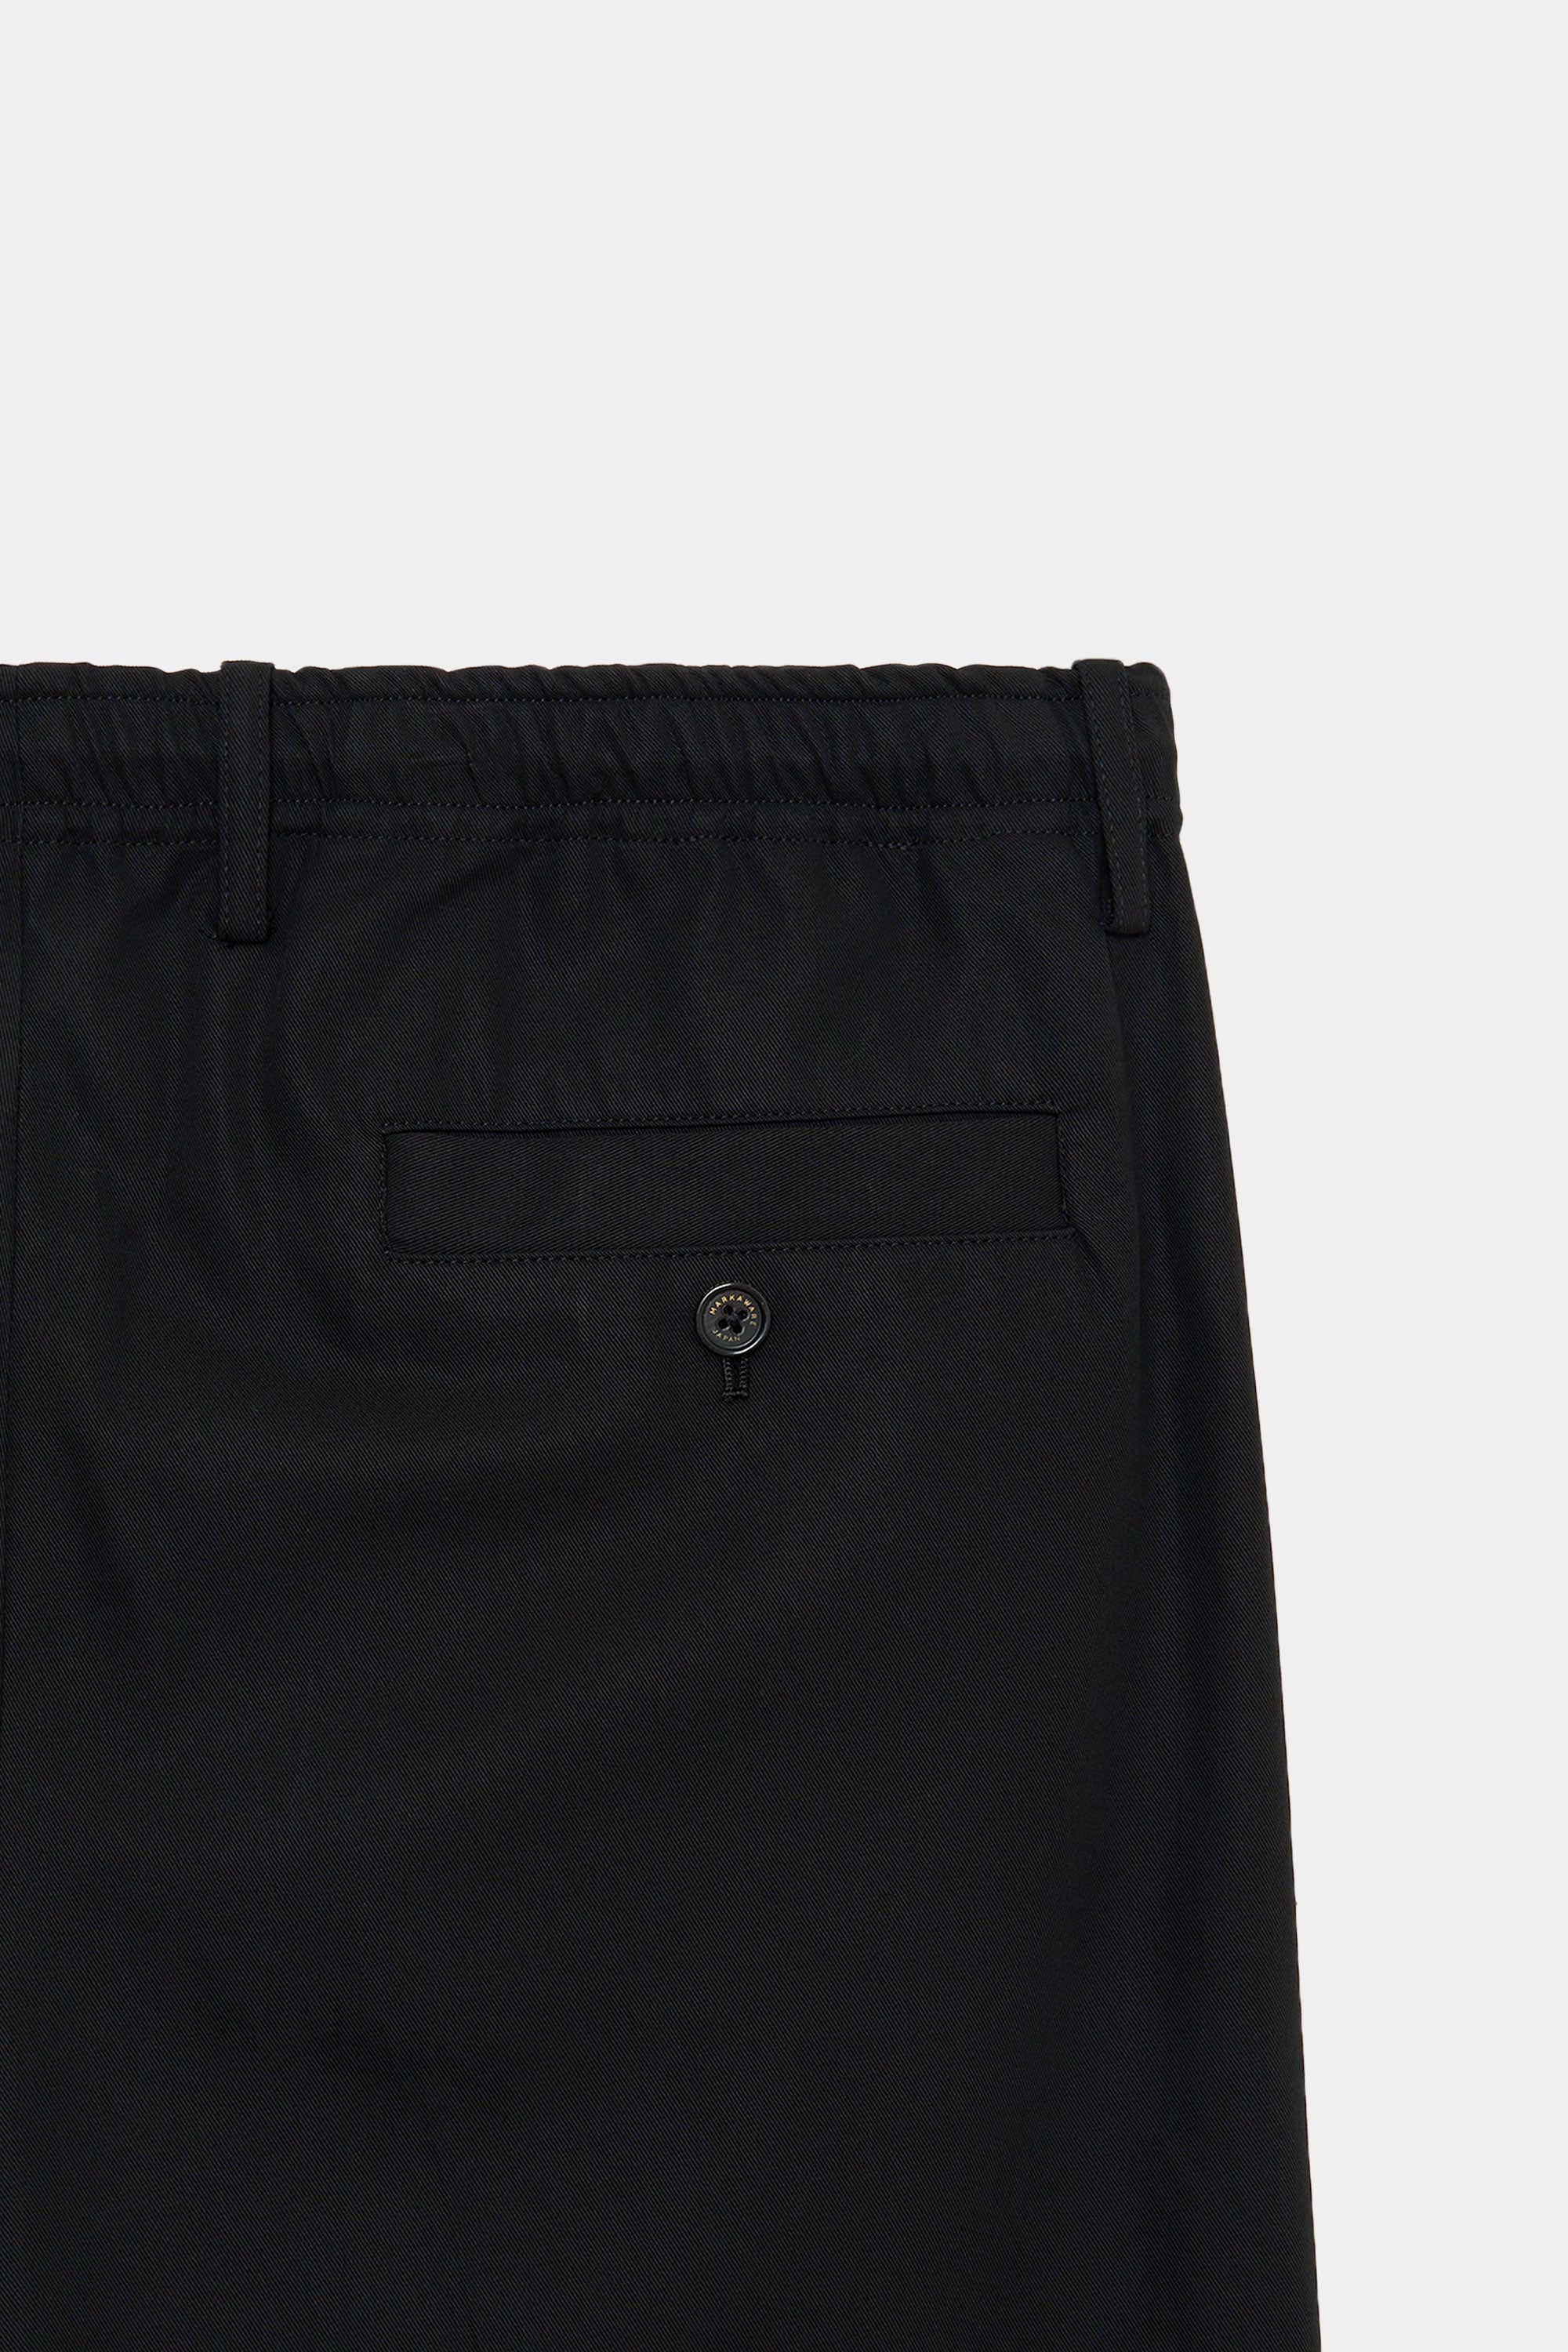 DRY VOILE TWILL DOUBLE PLEATED EASY TROUSERS, Black